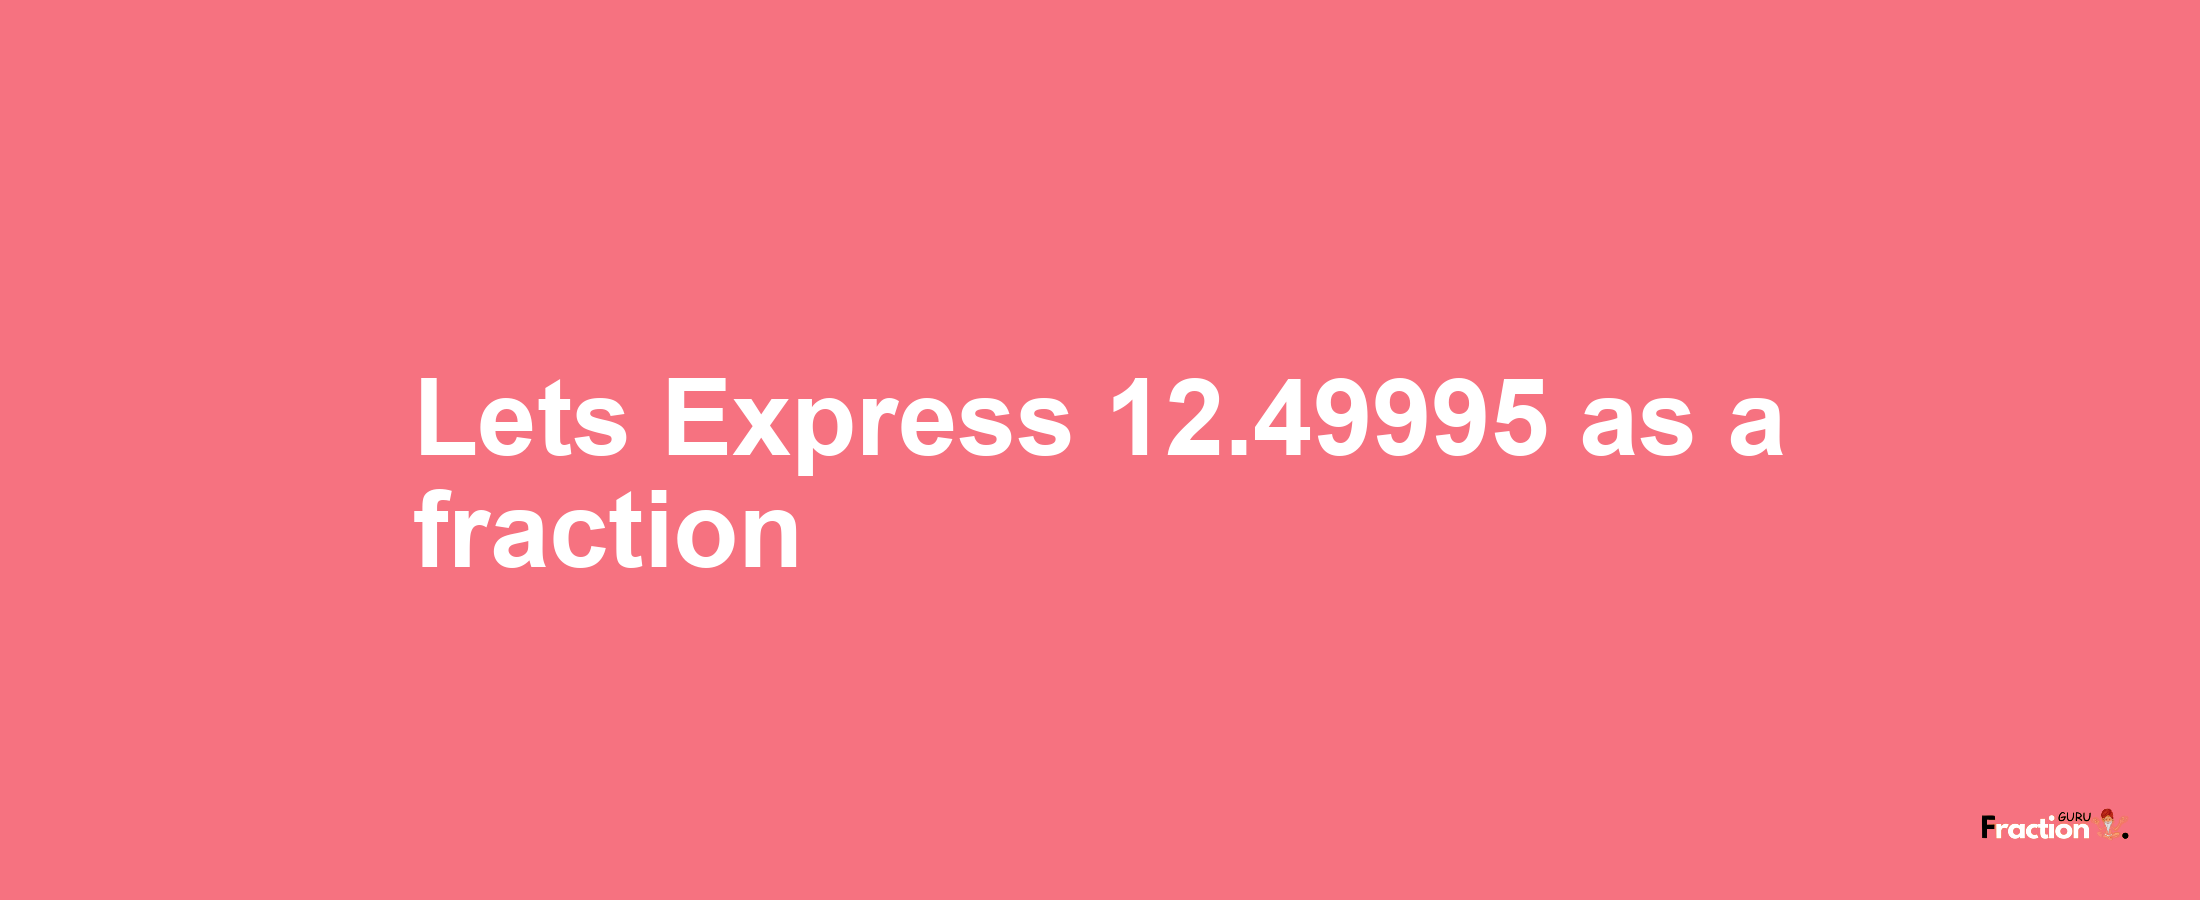 Lets Express 12.49995 as afraction